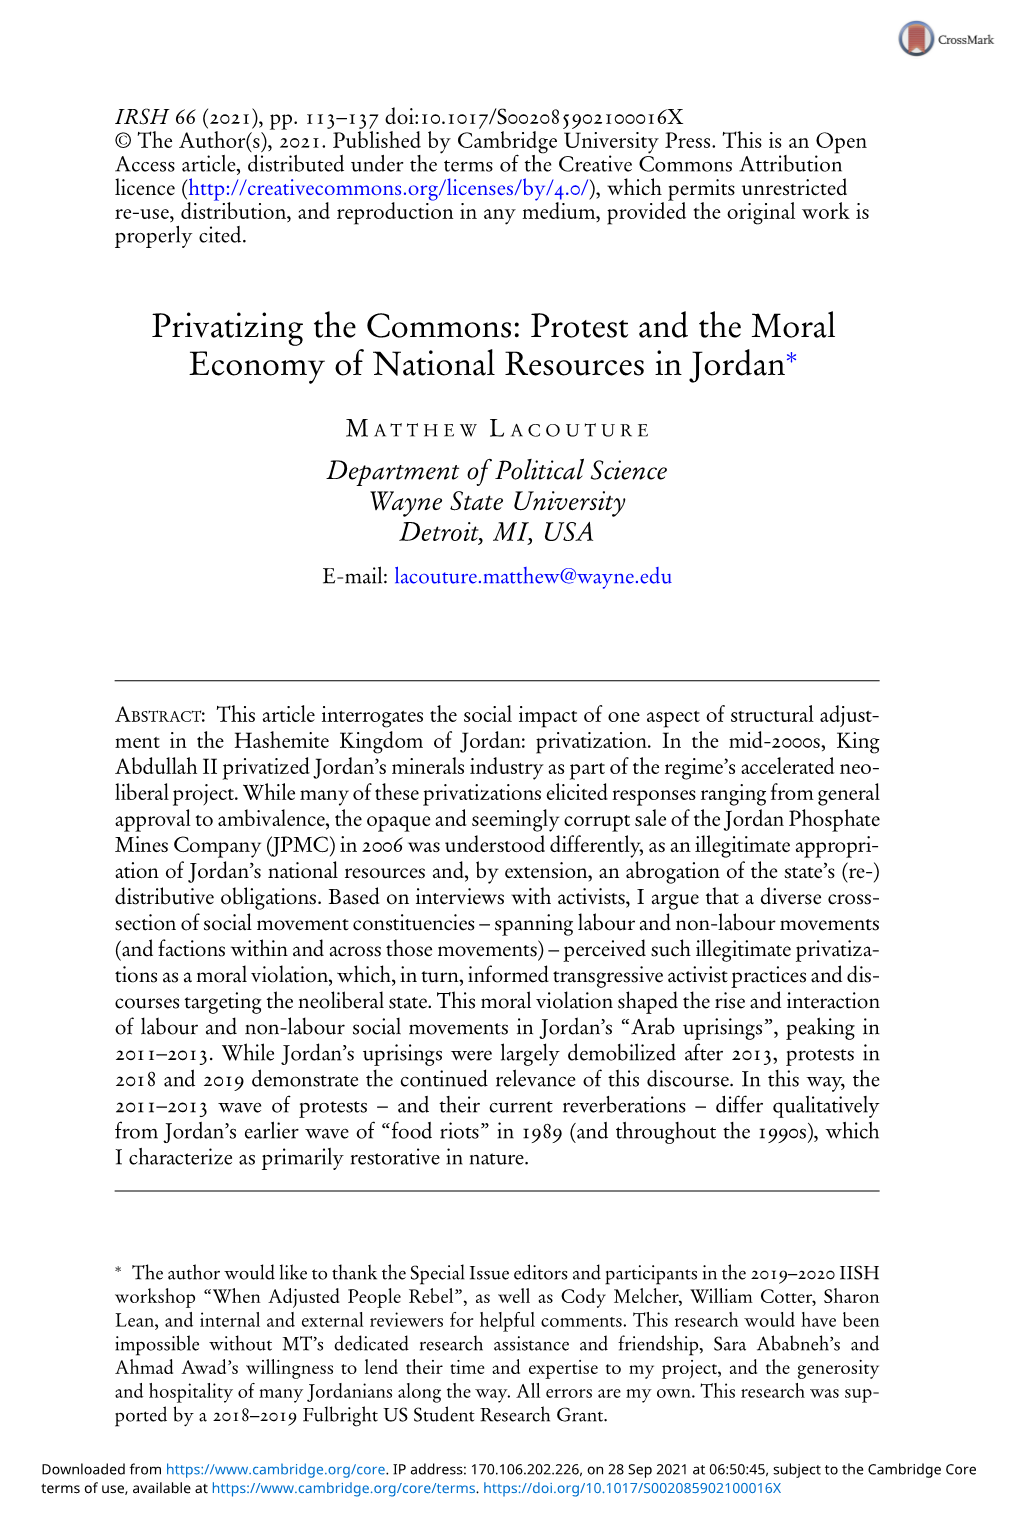 Privatizing the Commons: Protest and the Moral Economy of National Resources in Jordan∗